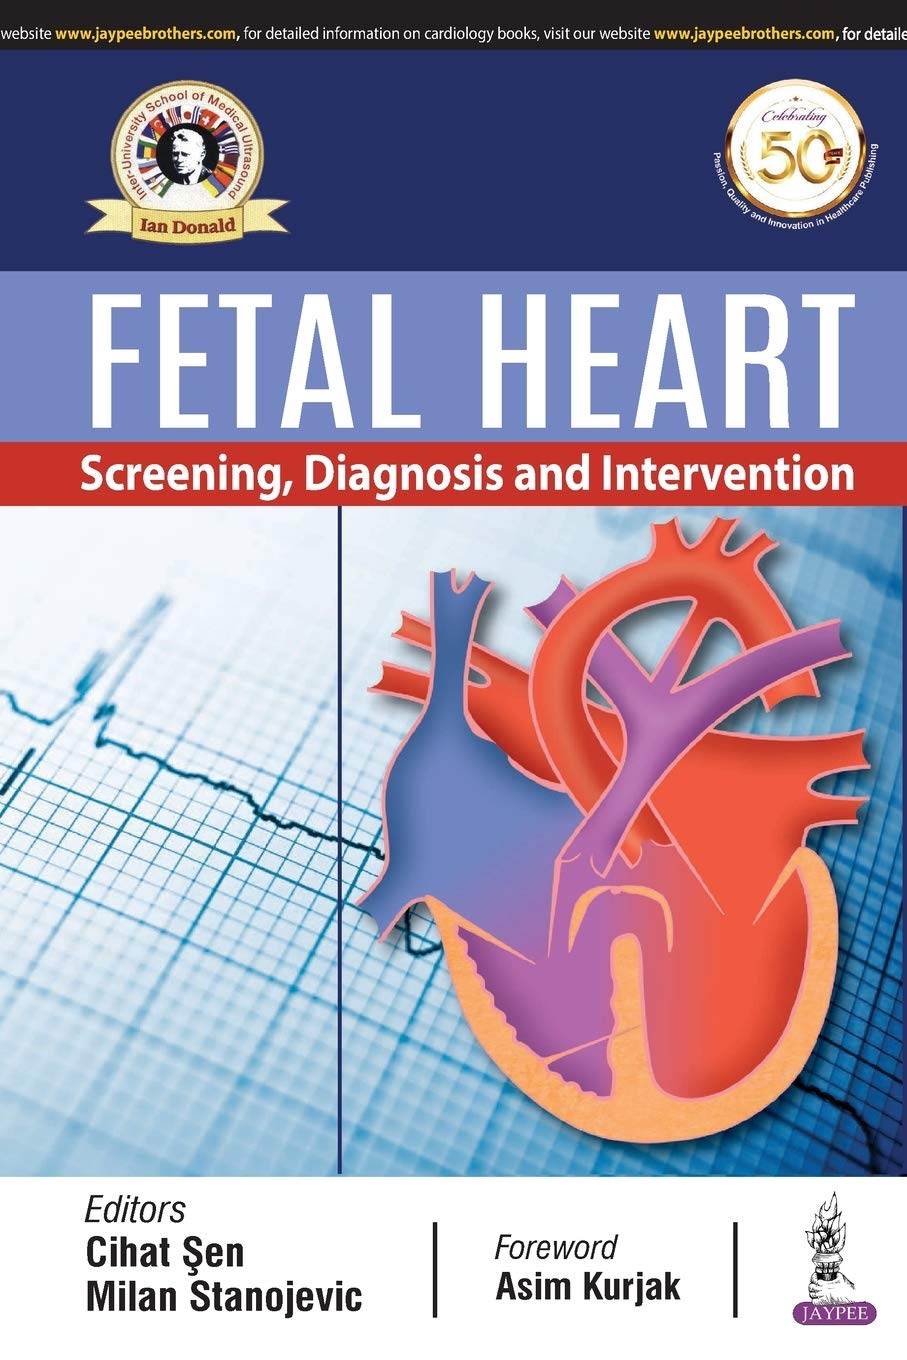 Fetal Heart: Screening, Diagnosis And Intervention